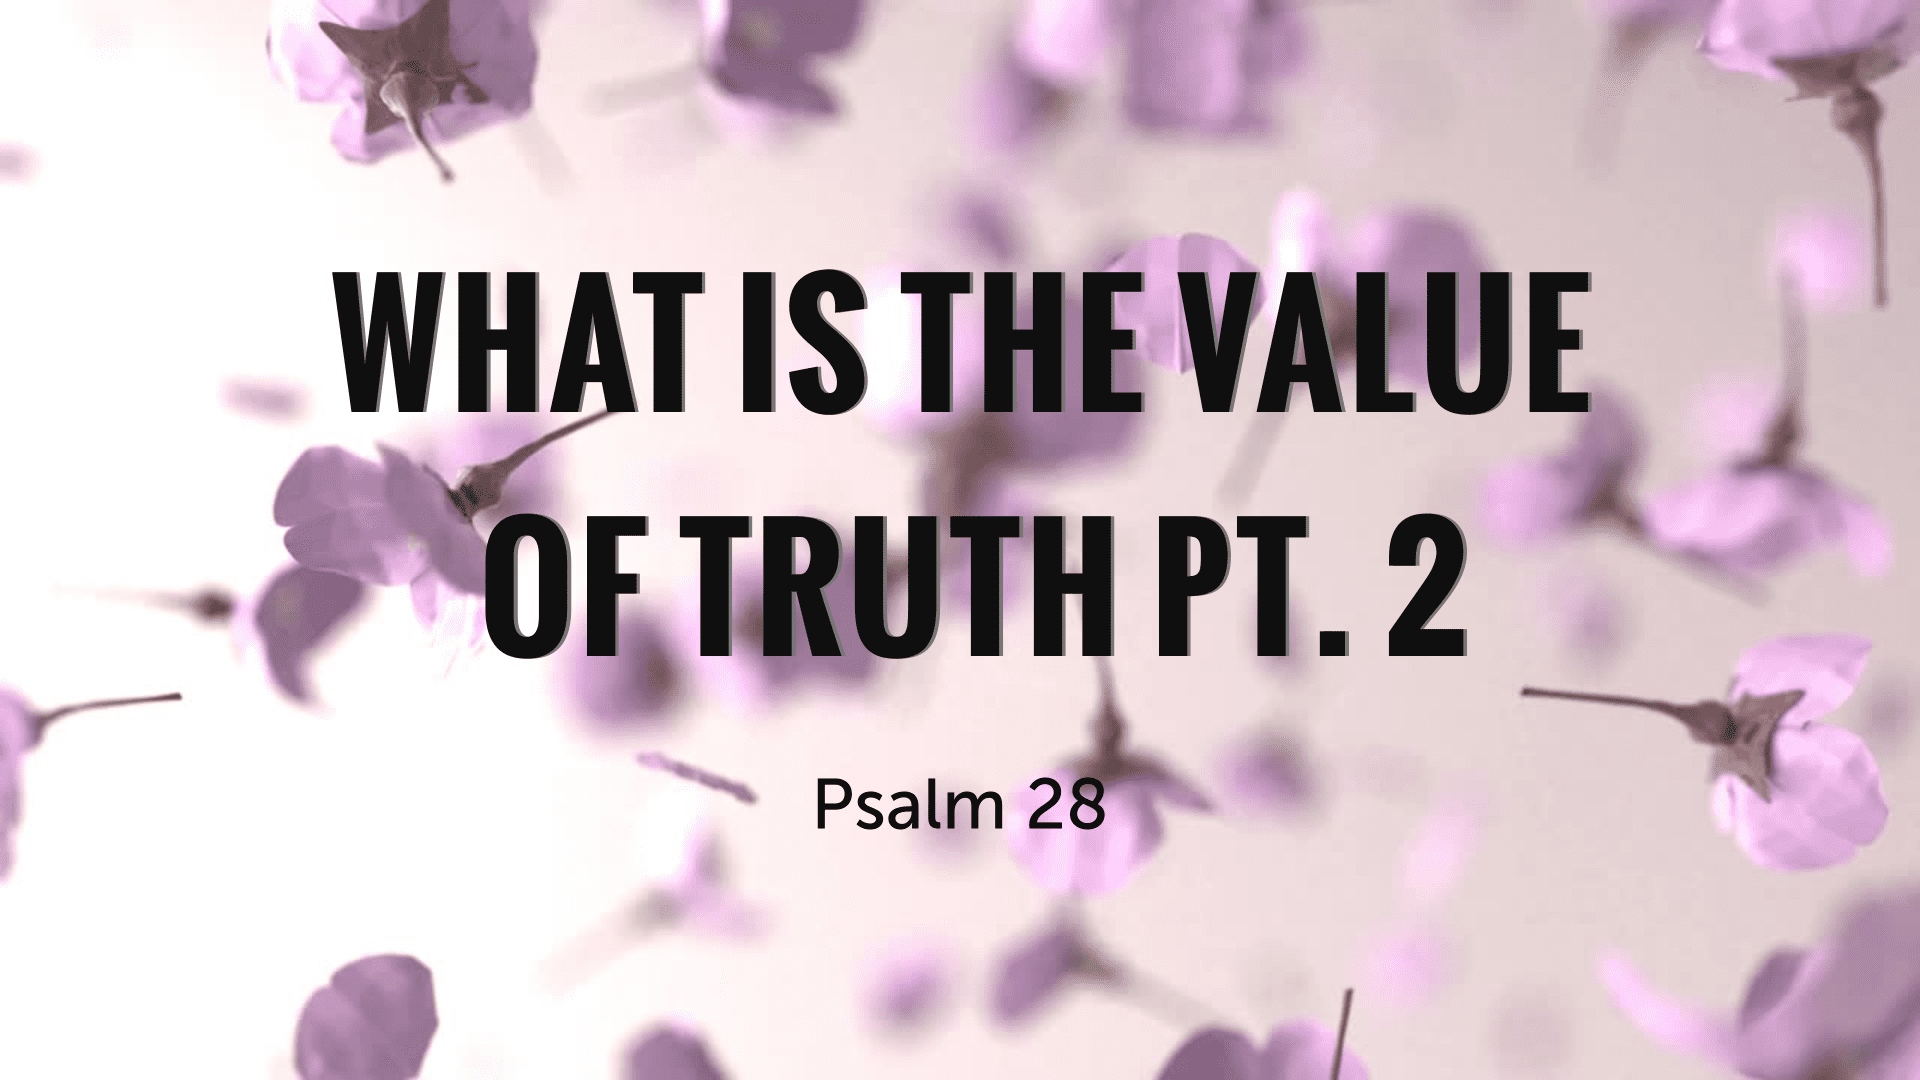 What is the value of truth pt2